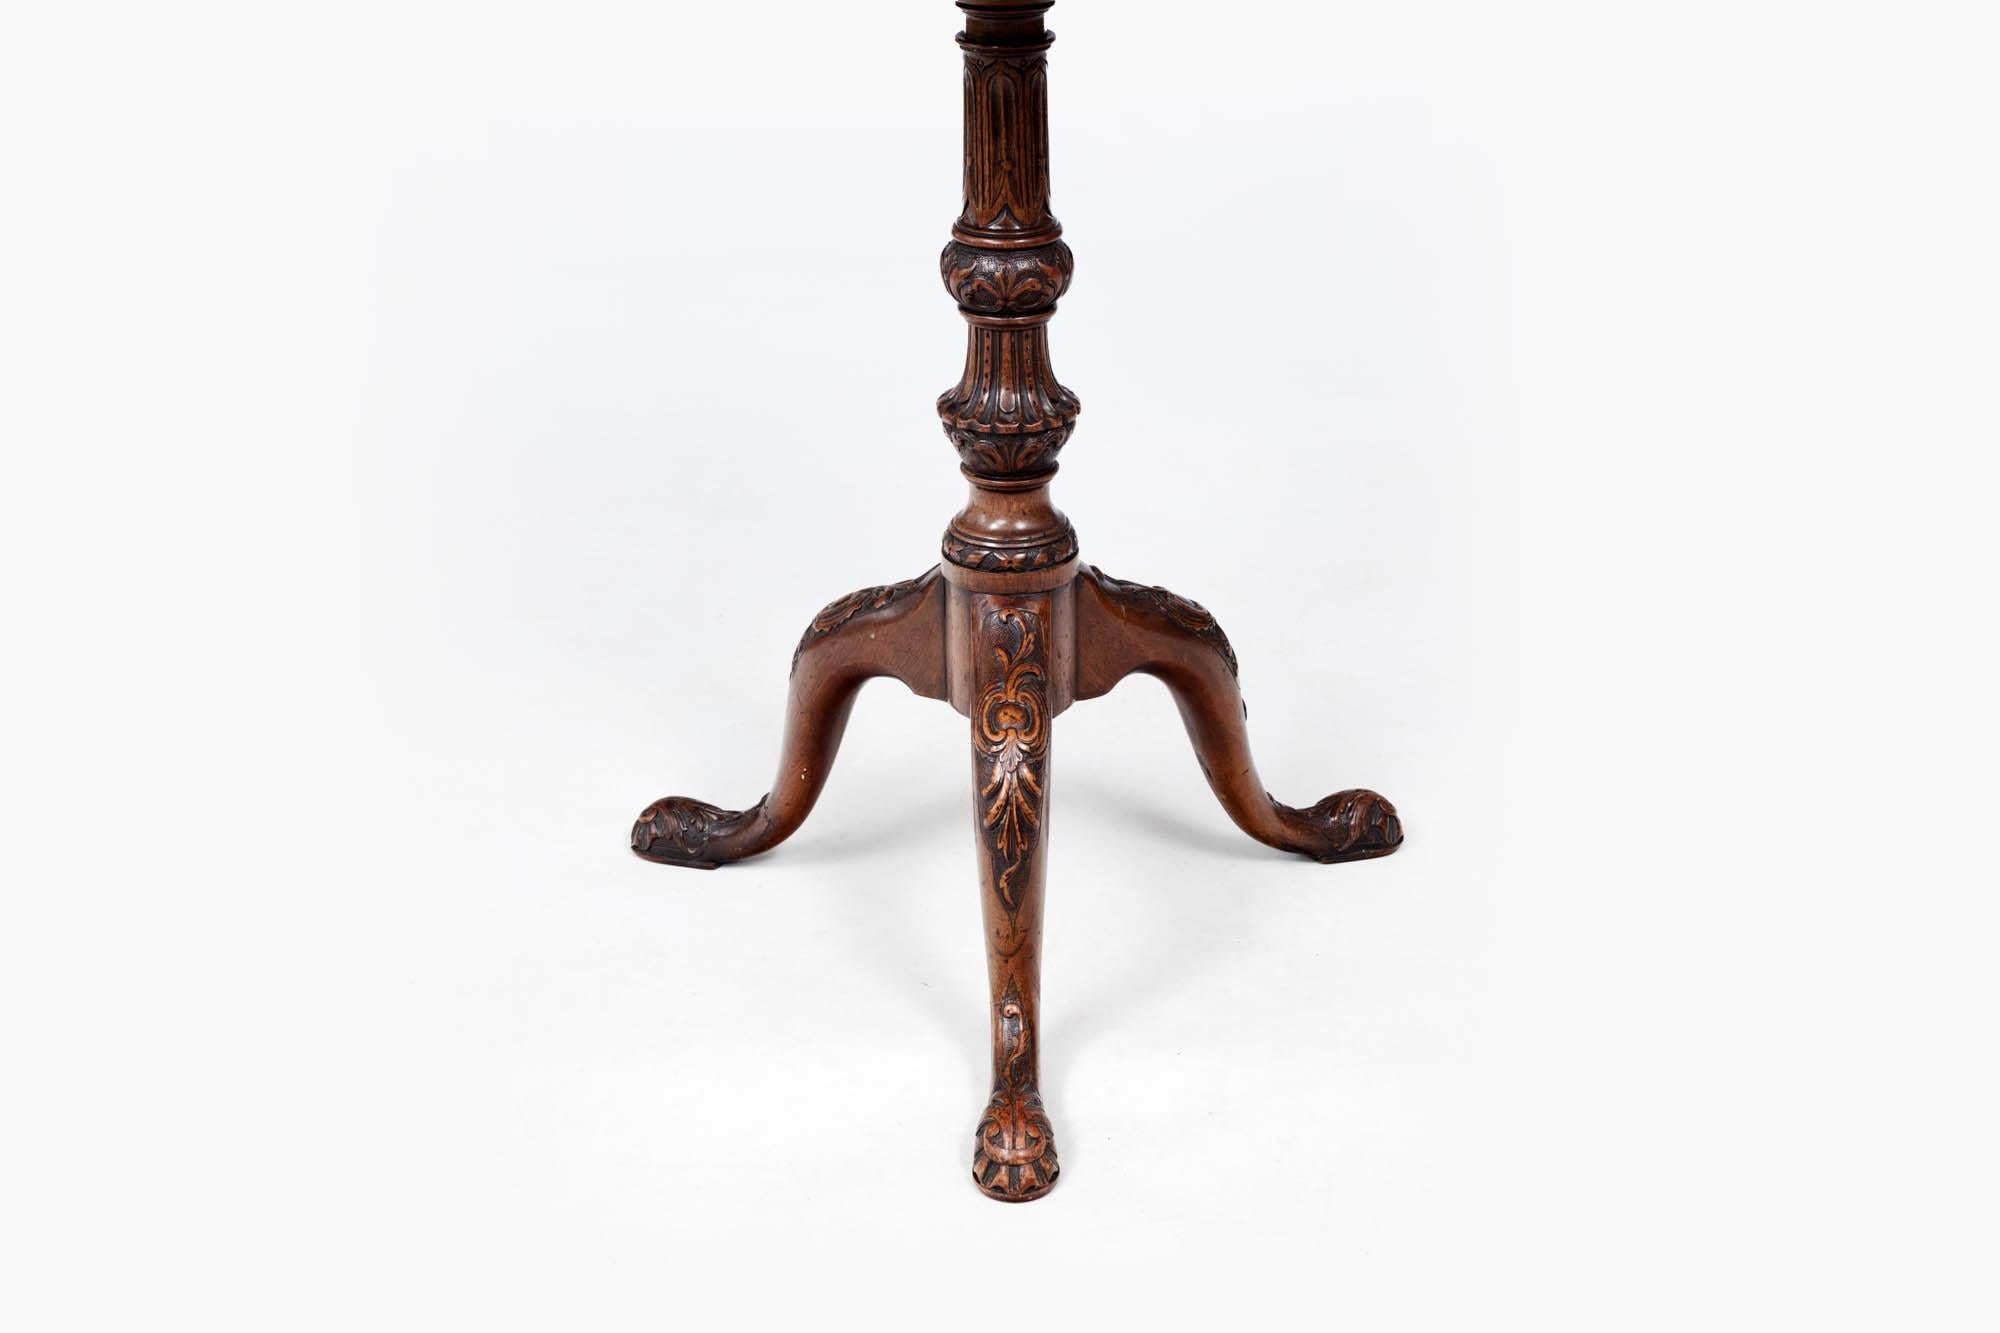 18th century Georgian occasional table with pie crust dish top supported on a decorative turned pedestal, with a tripod base terminating on cabriole legs and slipper feet with carved foliate detail.